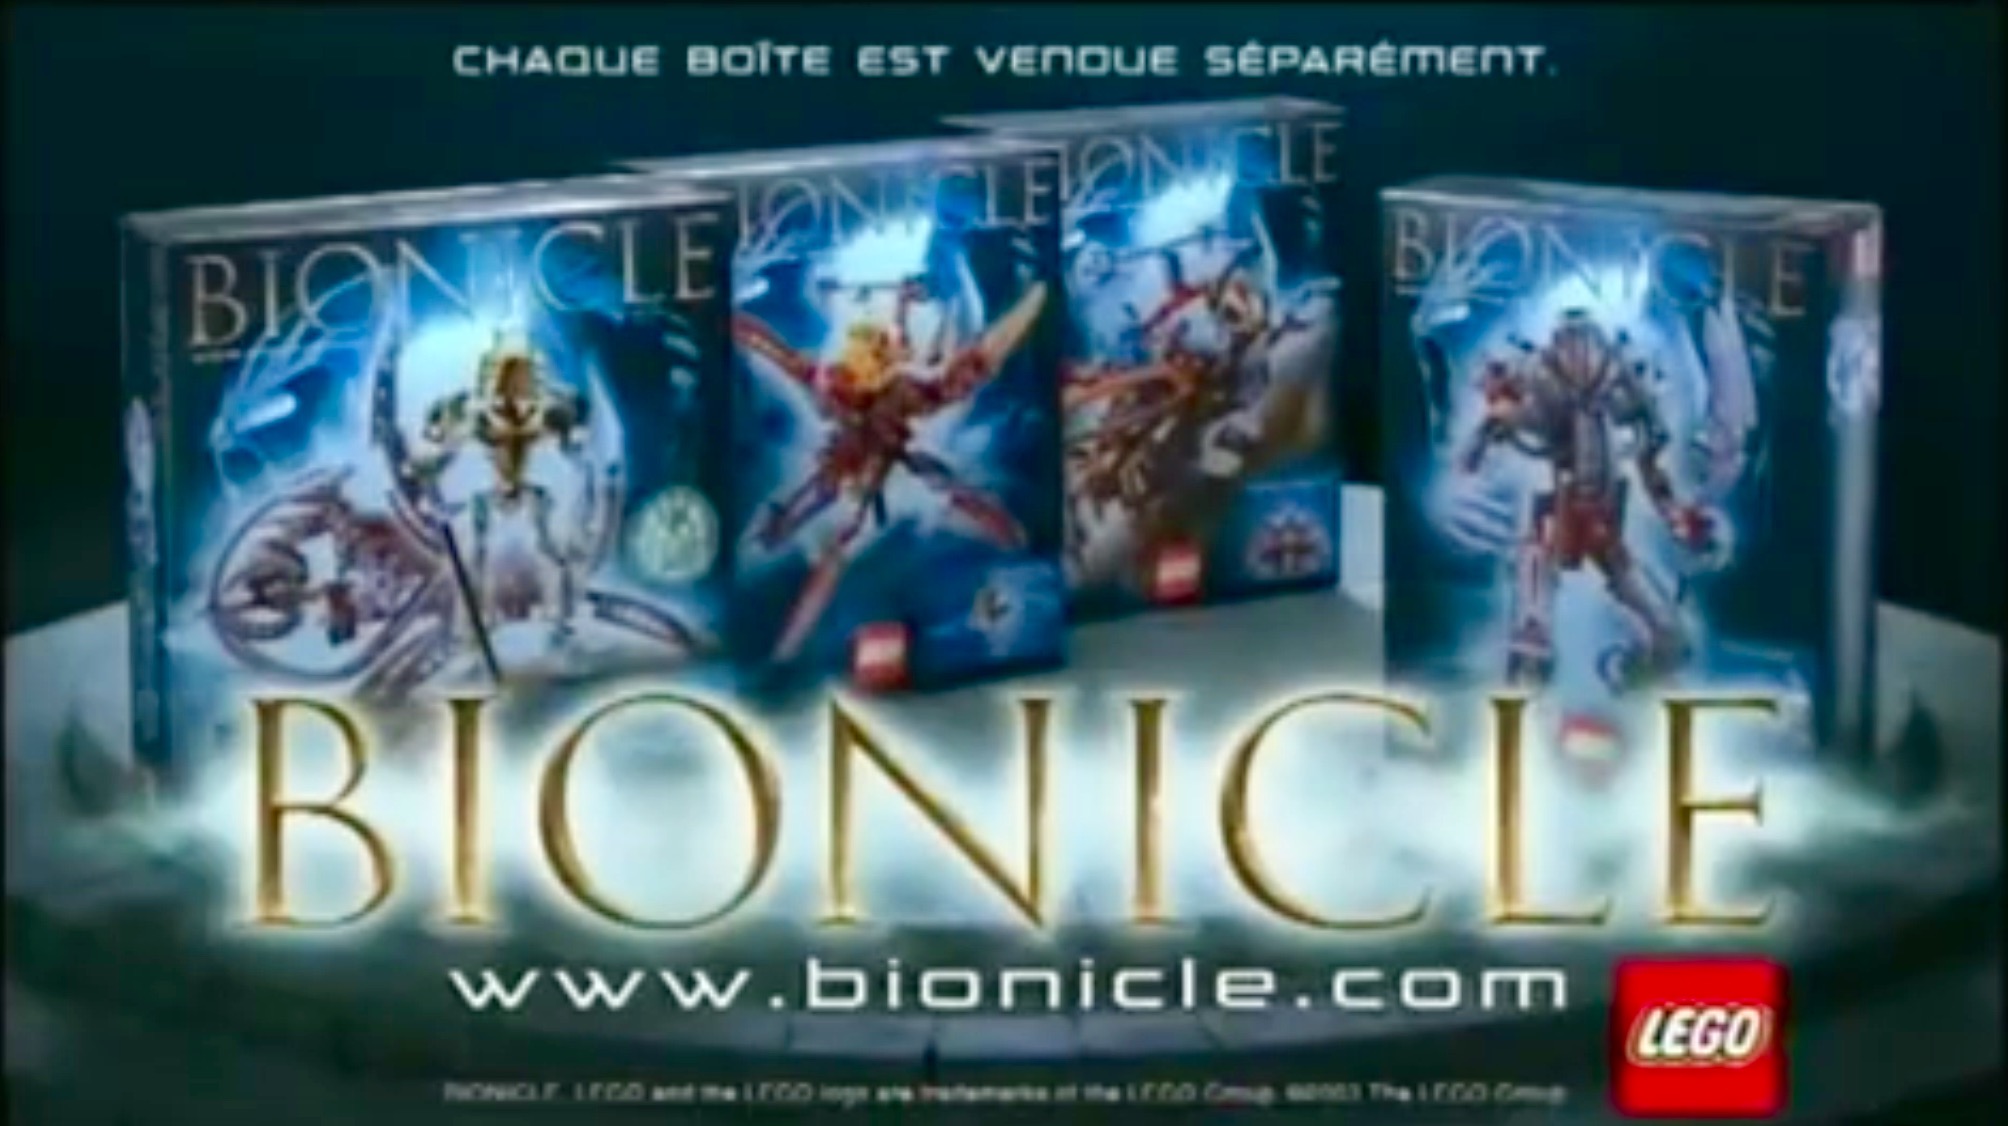 Bionicle commercial.jpg